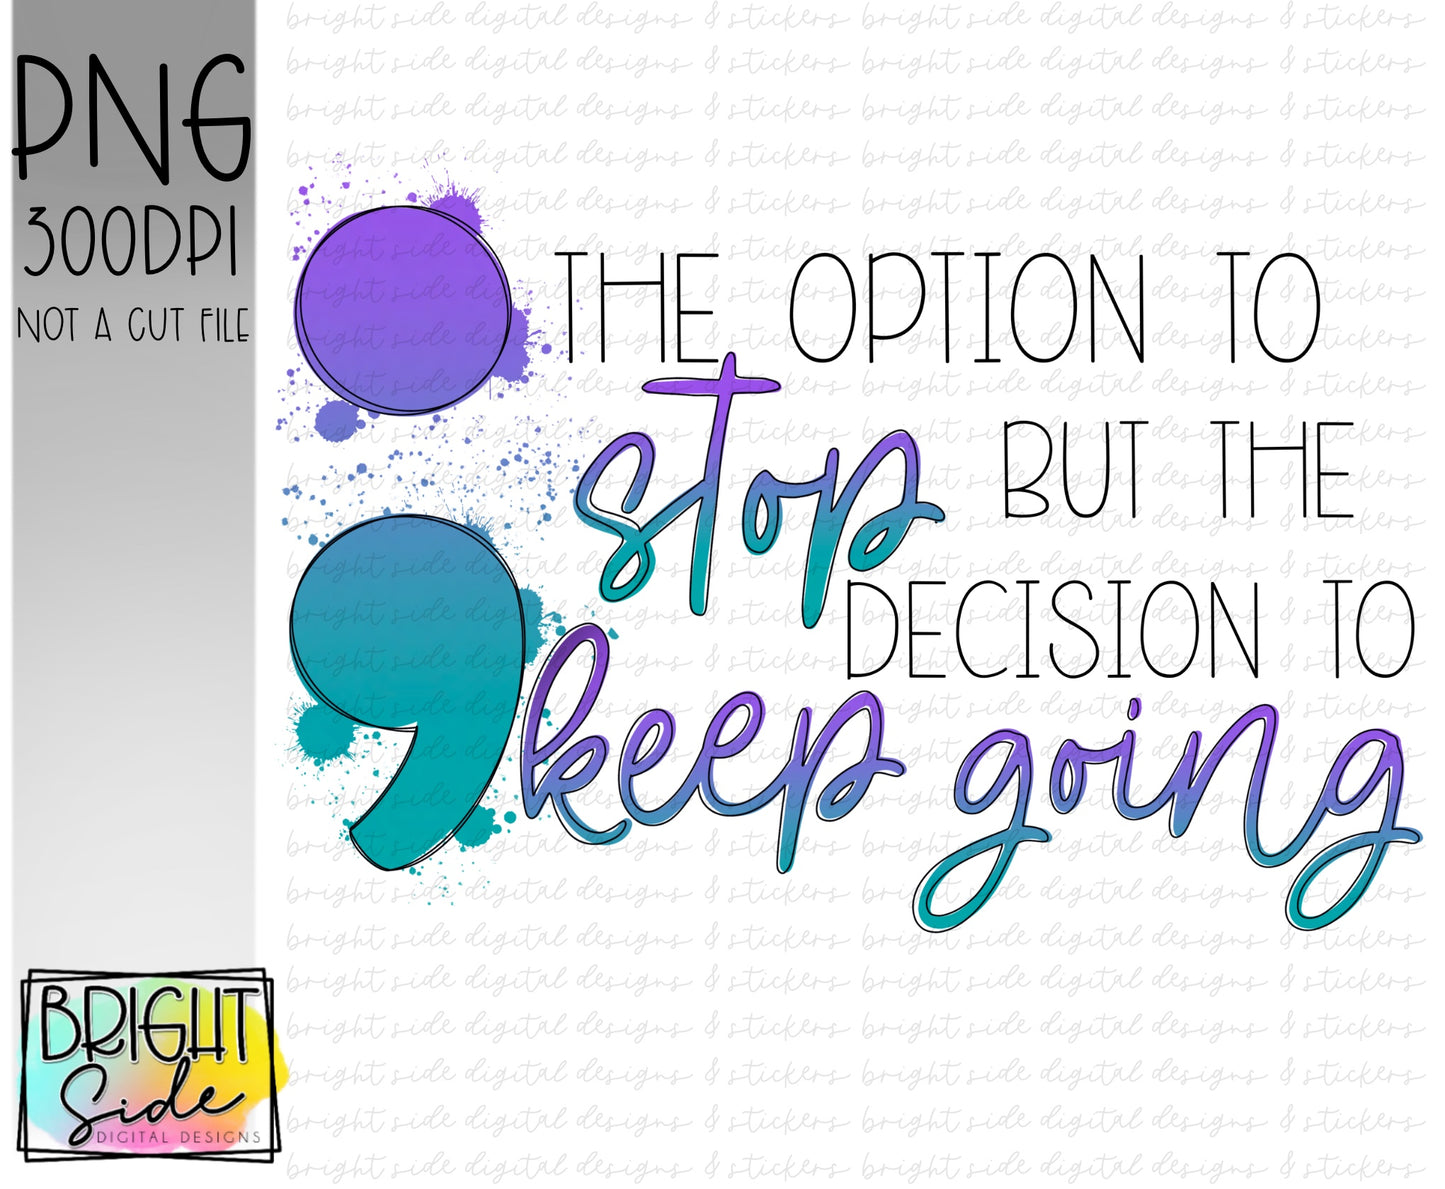 The option to stop but the decision to keep going